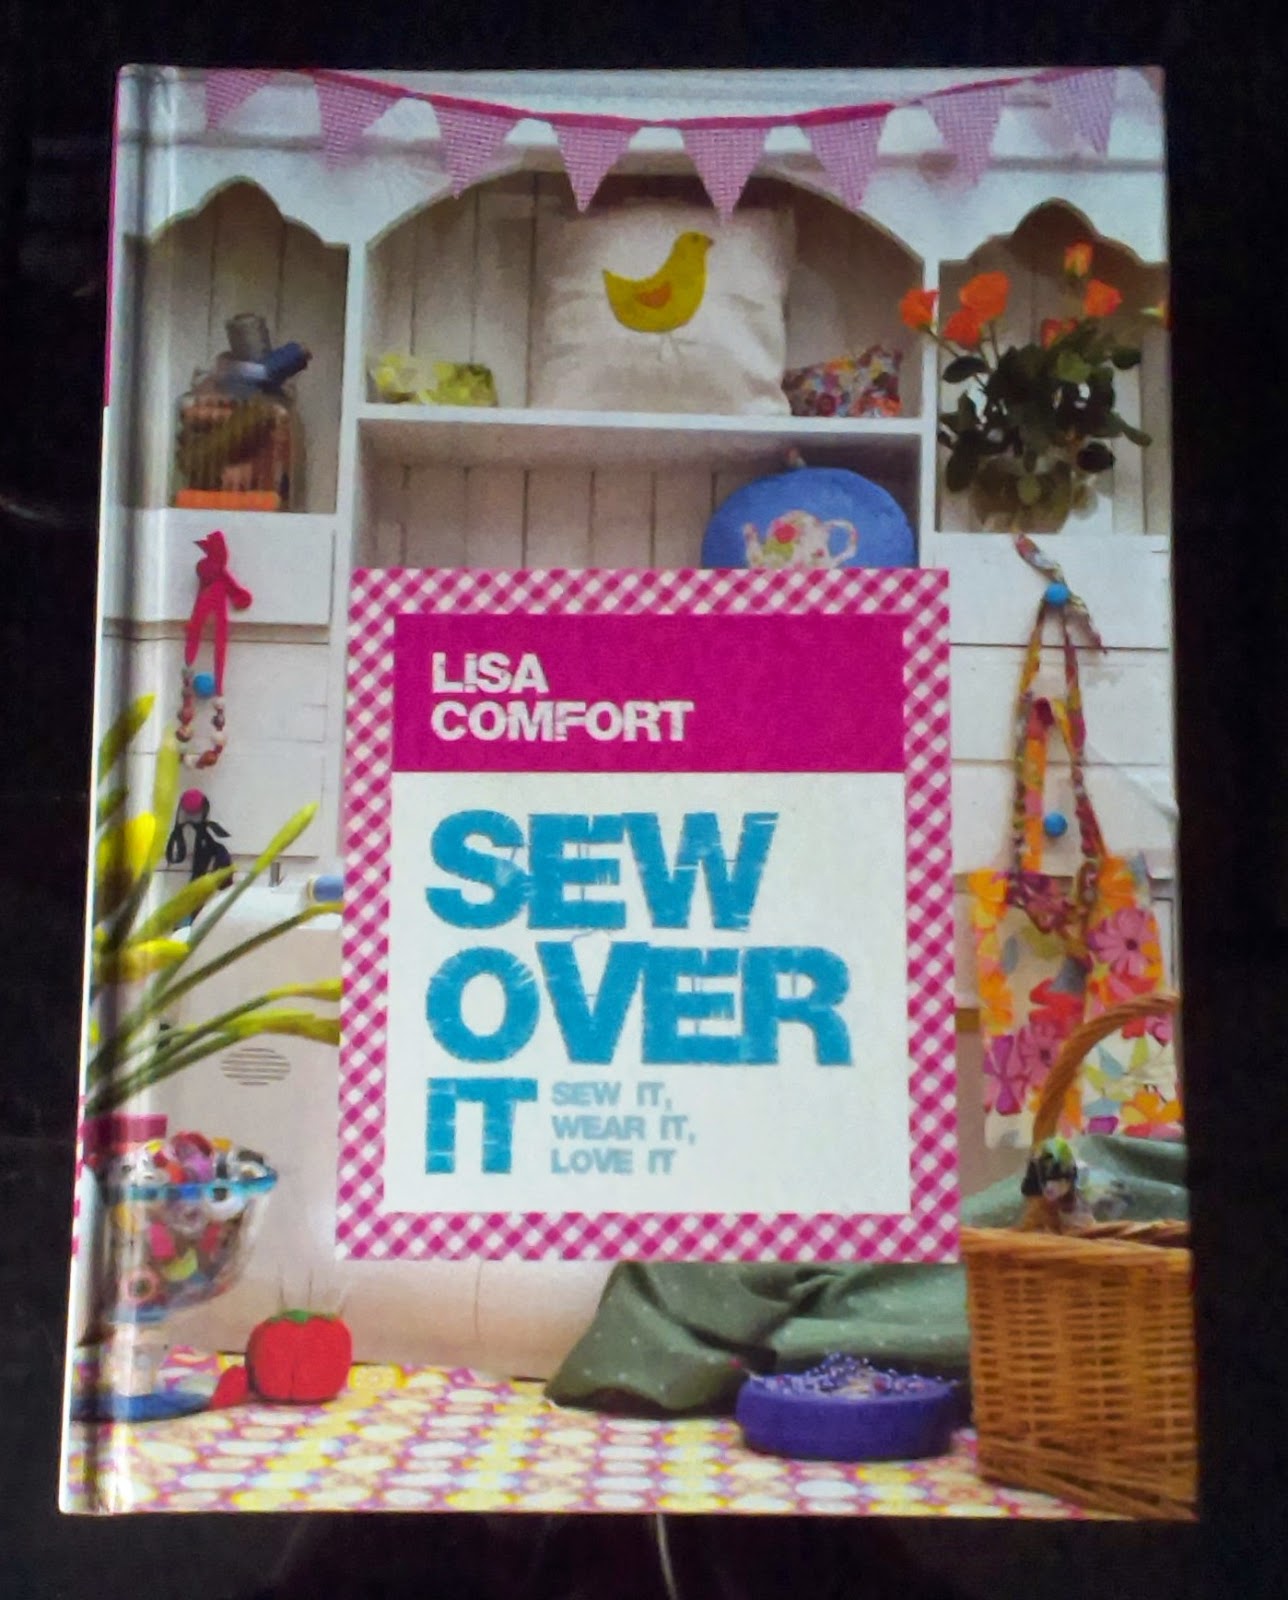 Sew Over It by Lisa Comfort